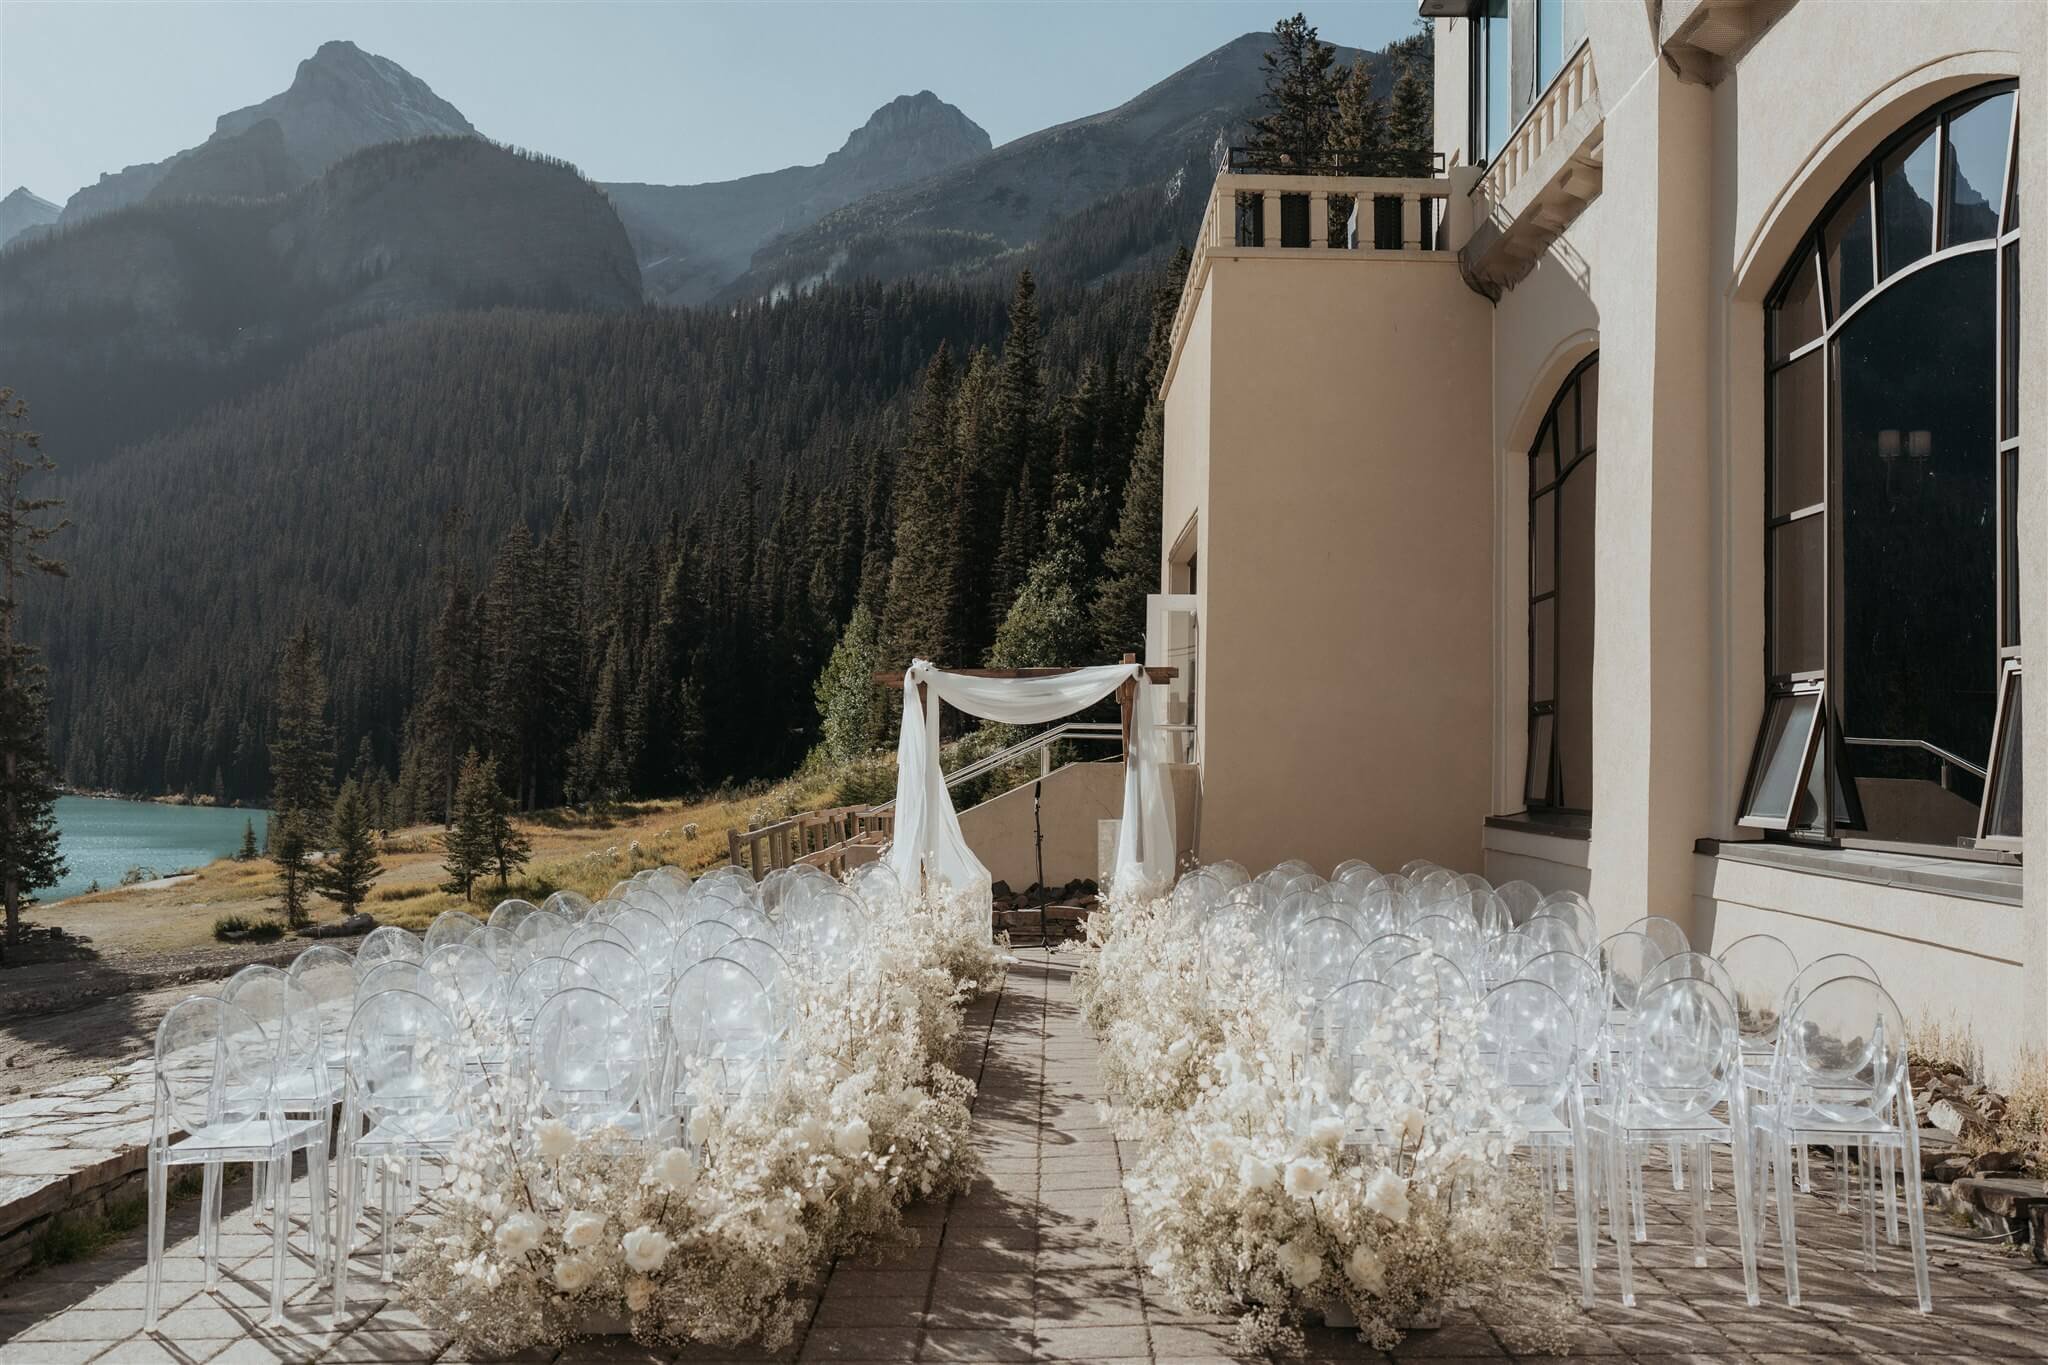 Outdoor wedding ceremony setup with white and gold wedding decorations